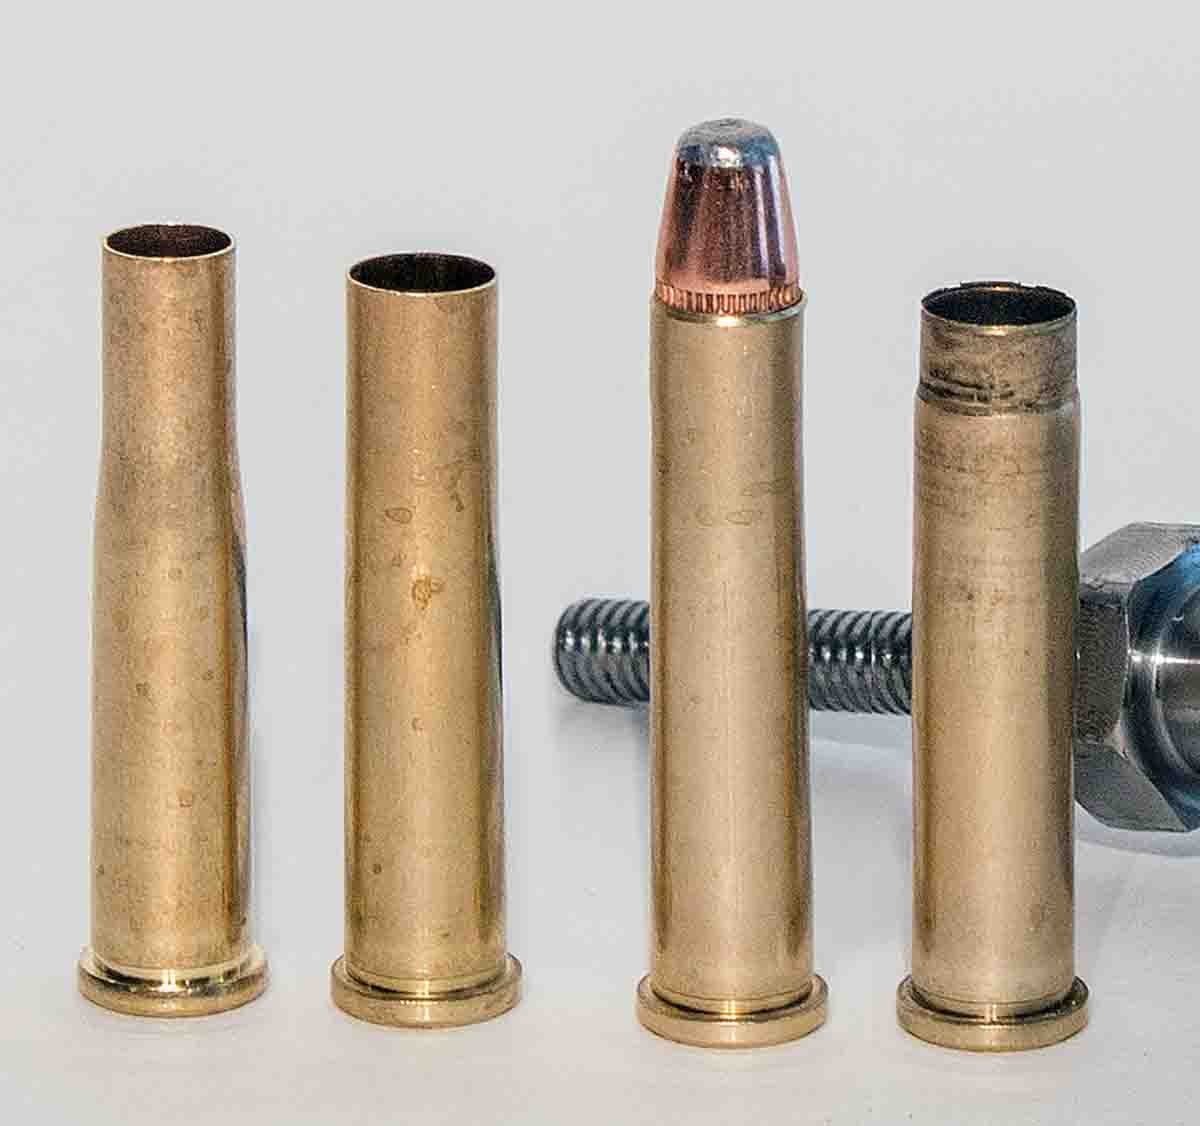 To create .255 Banshee brass from (1) .22 Hornet brass, (2) size cases with a Banshee die, (3) load with a 60-grain bullet ahead of a powder charge 10 percent shy of maximum, and (4) fireform.